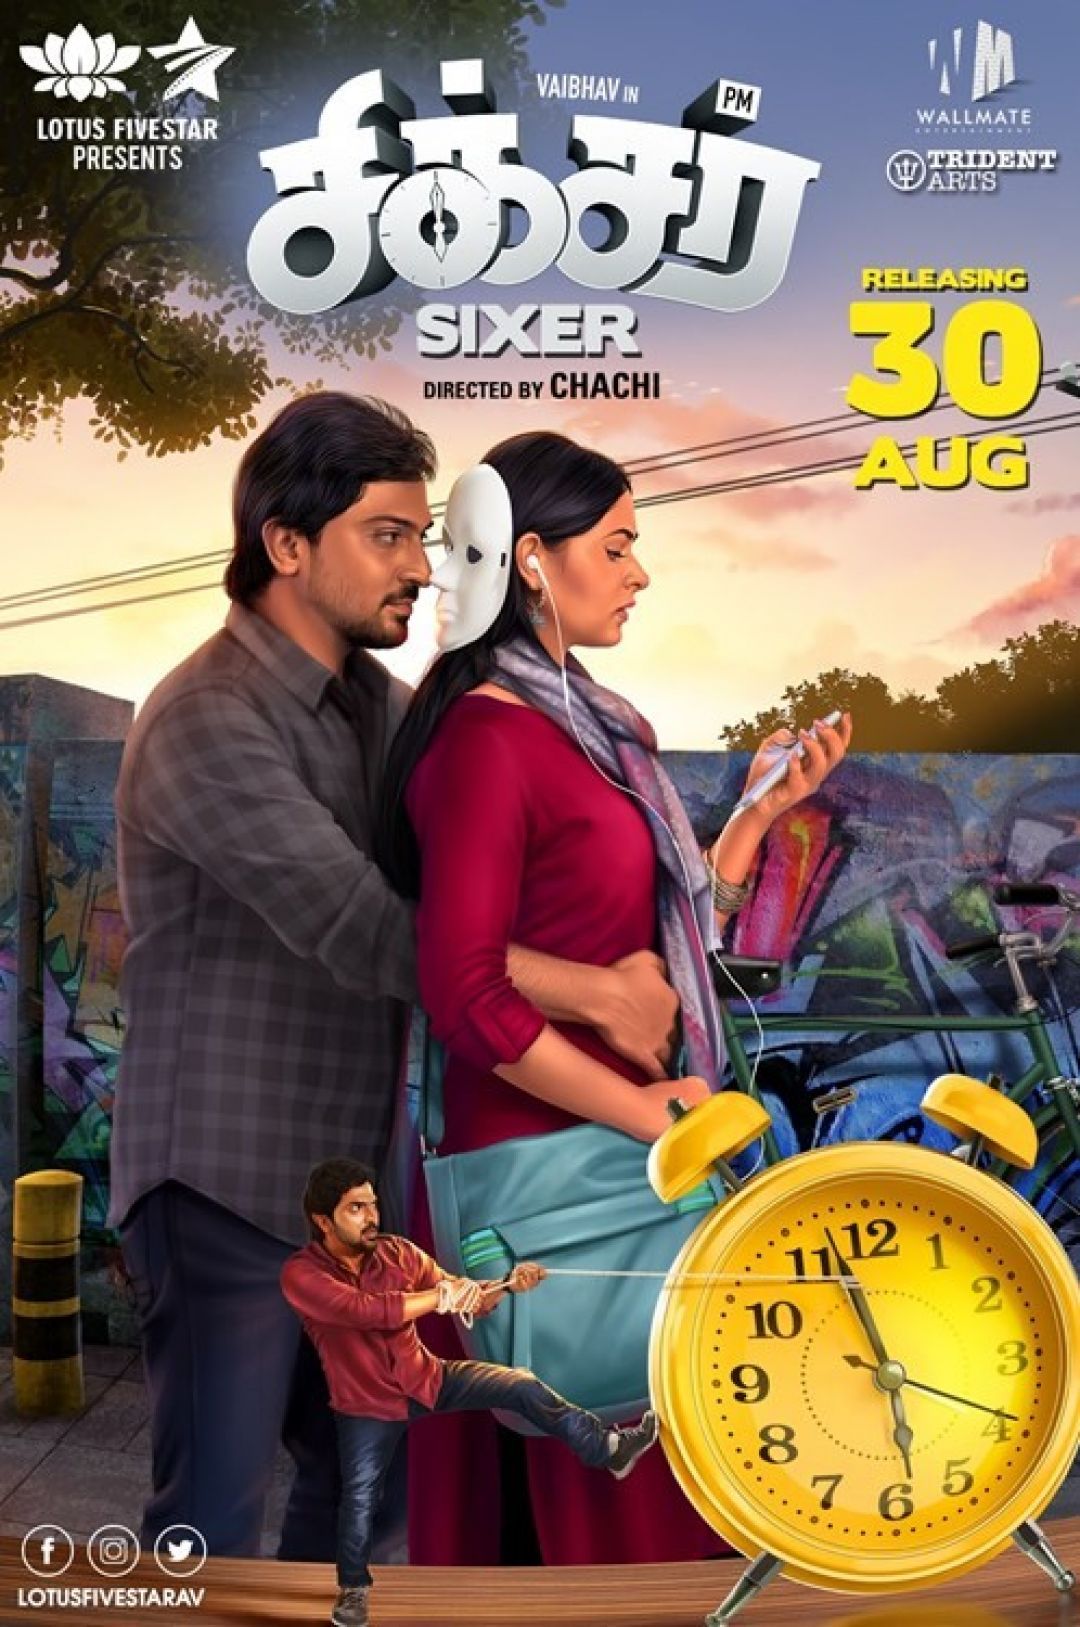 Sixer Movie Latest HD Photos and Wallpapers (1080p) (1042) - Sixer, Vaibhav Reddy, Palak Lalwani